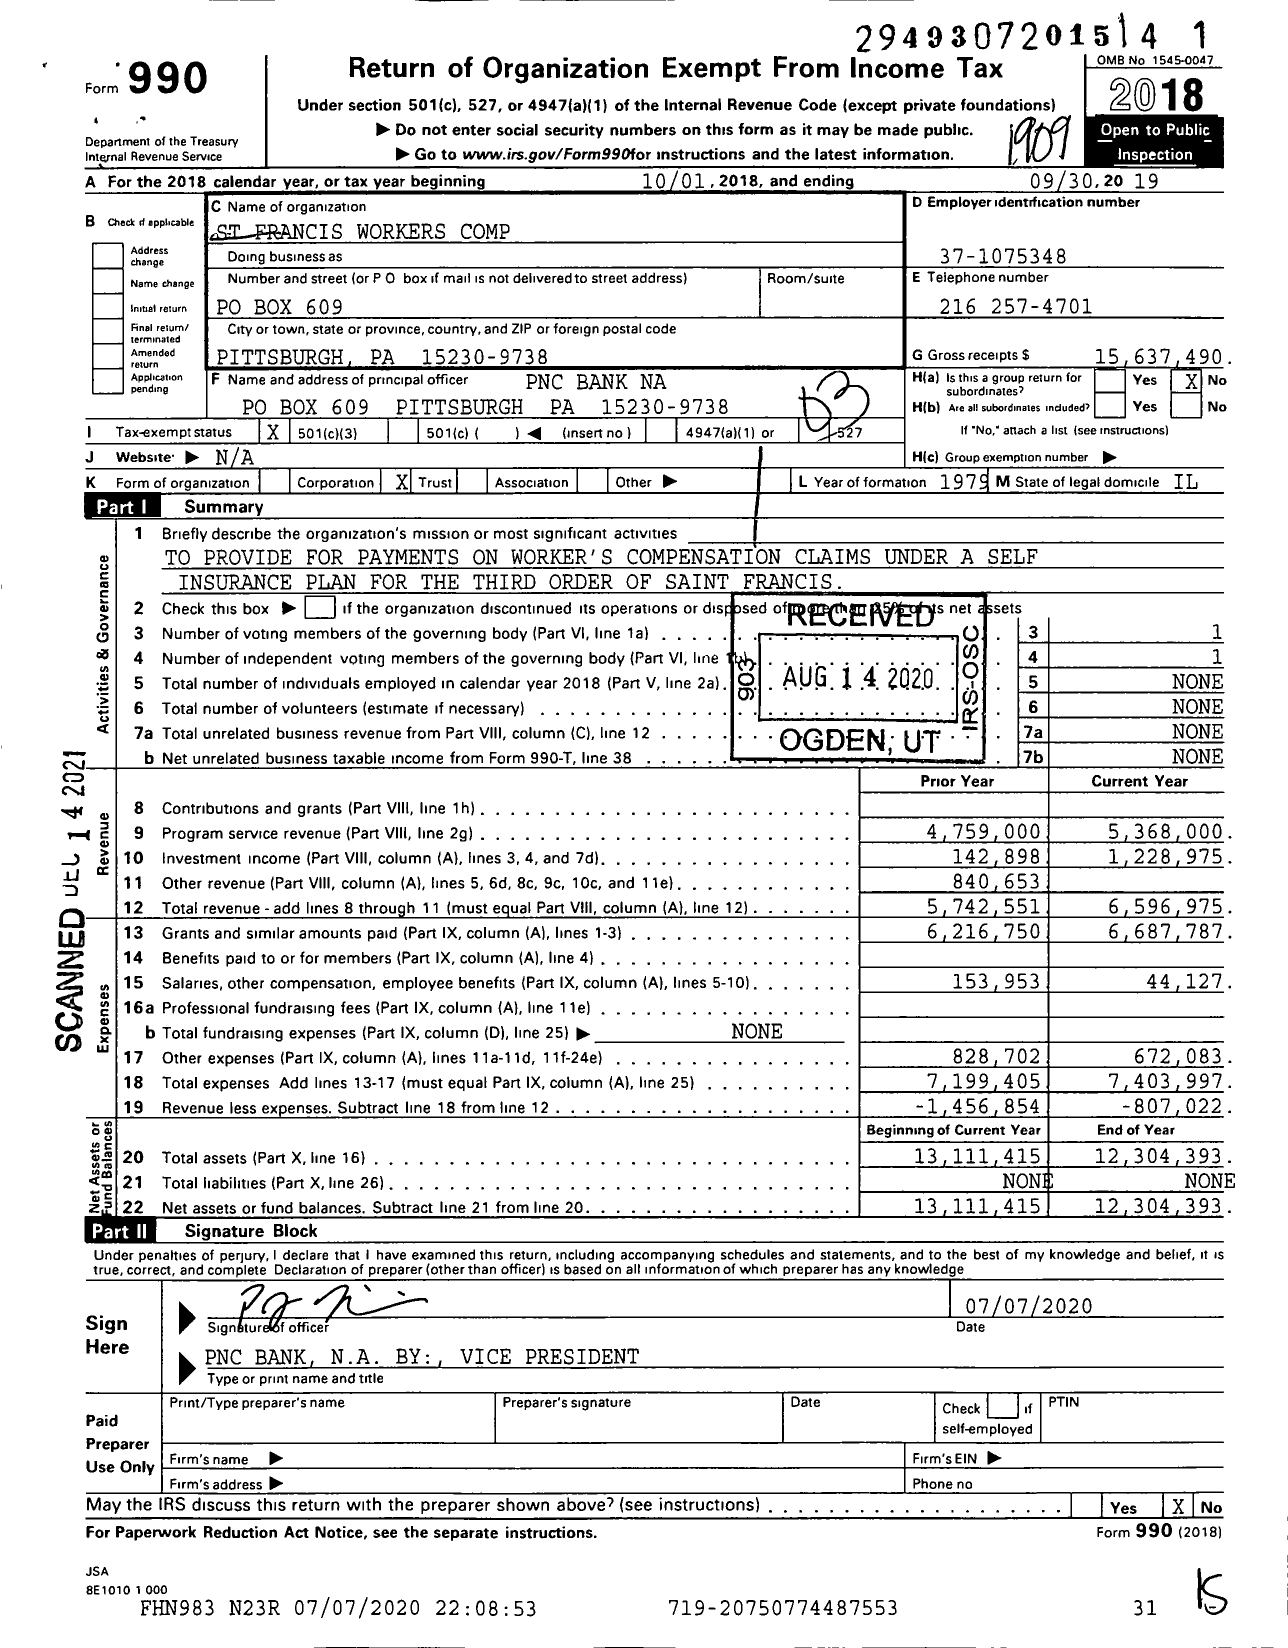 Image of first page of 2018 Form 990 for St Francis Workers Comp